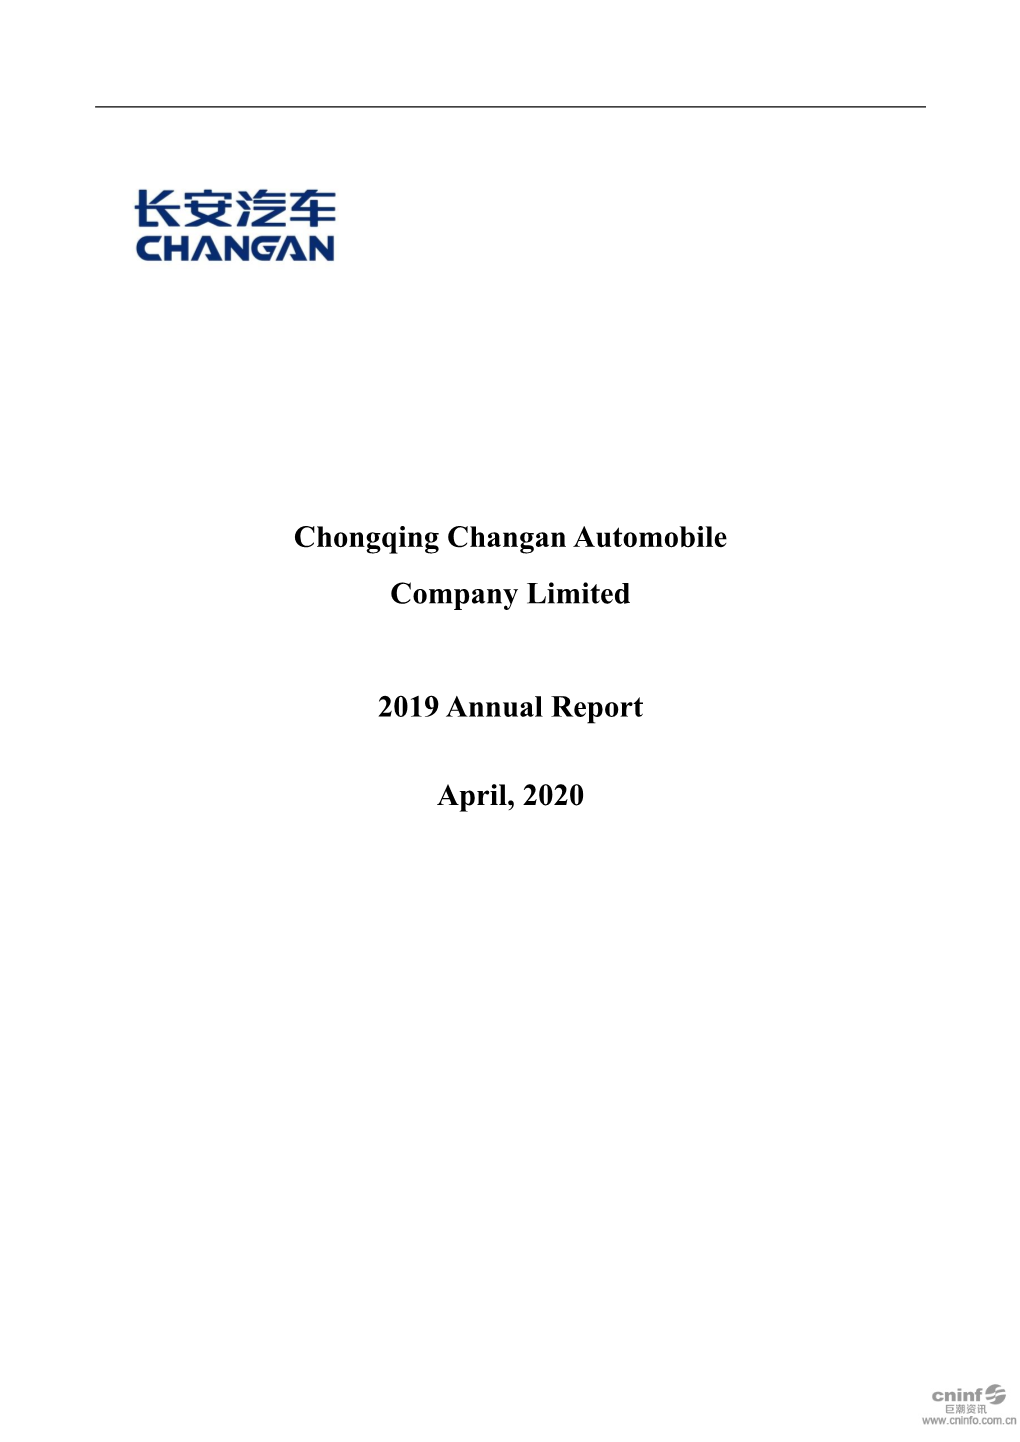 Chongqing Changan Automobile Company Limited 2019 Annual Report